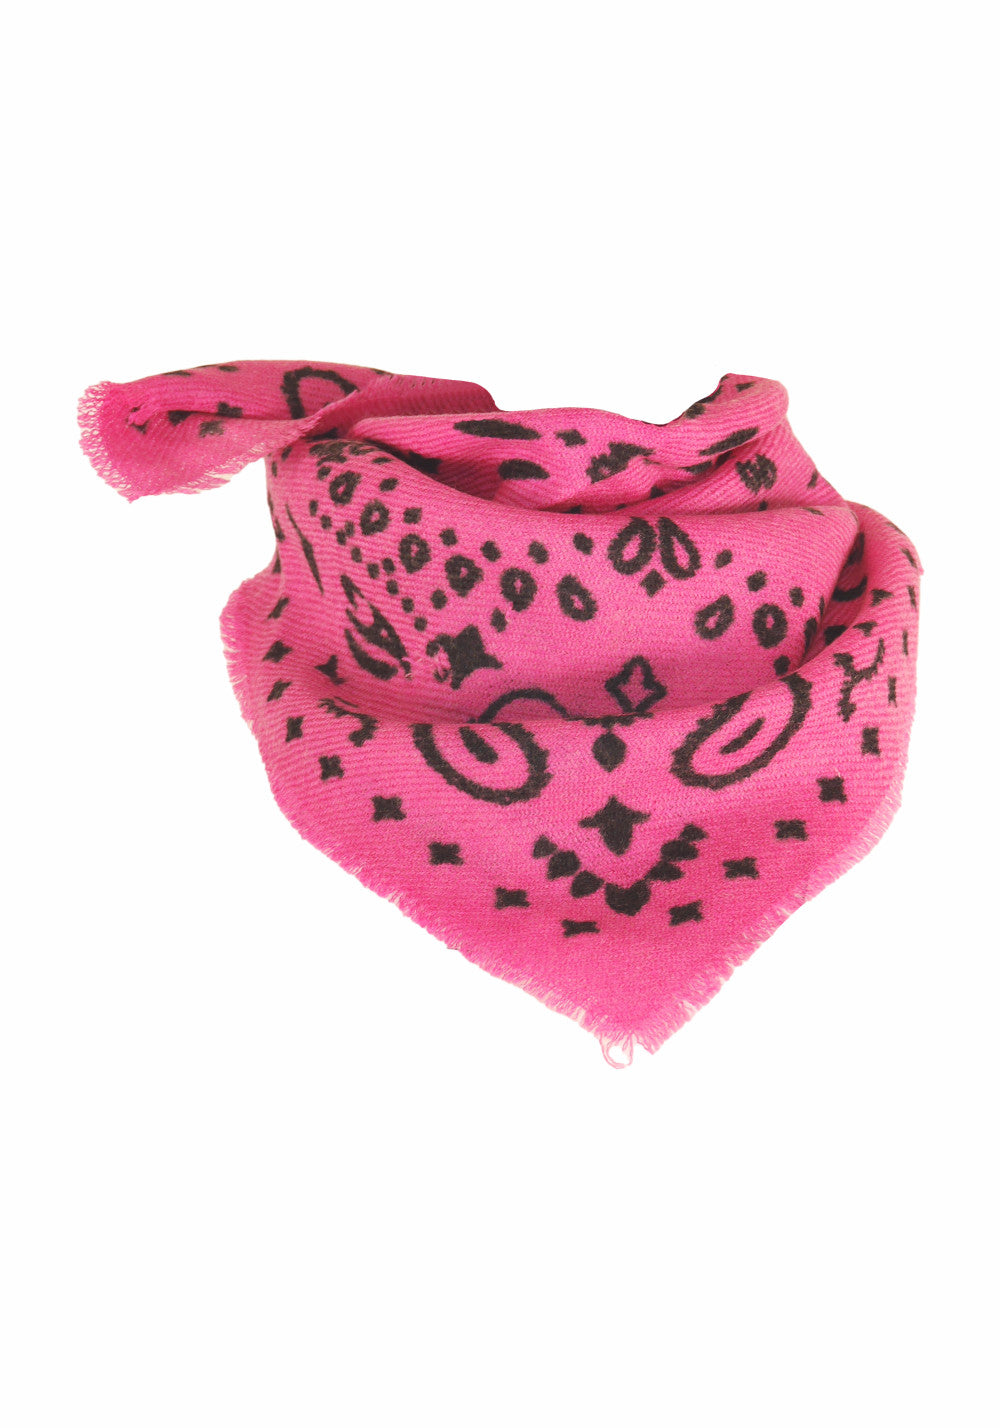 PRINTED NECK SCARF (ROSE) - MOMENT BY MOMENT